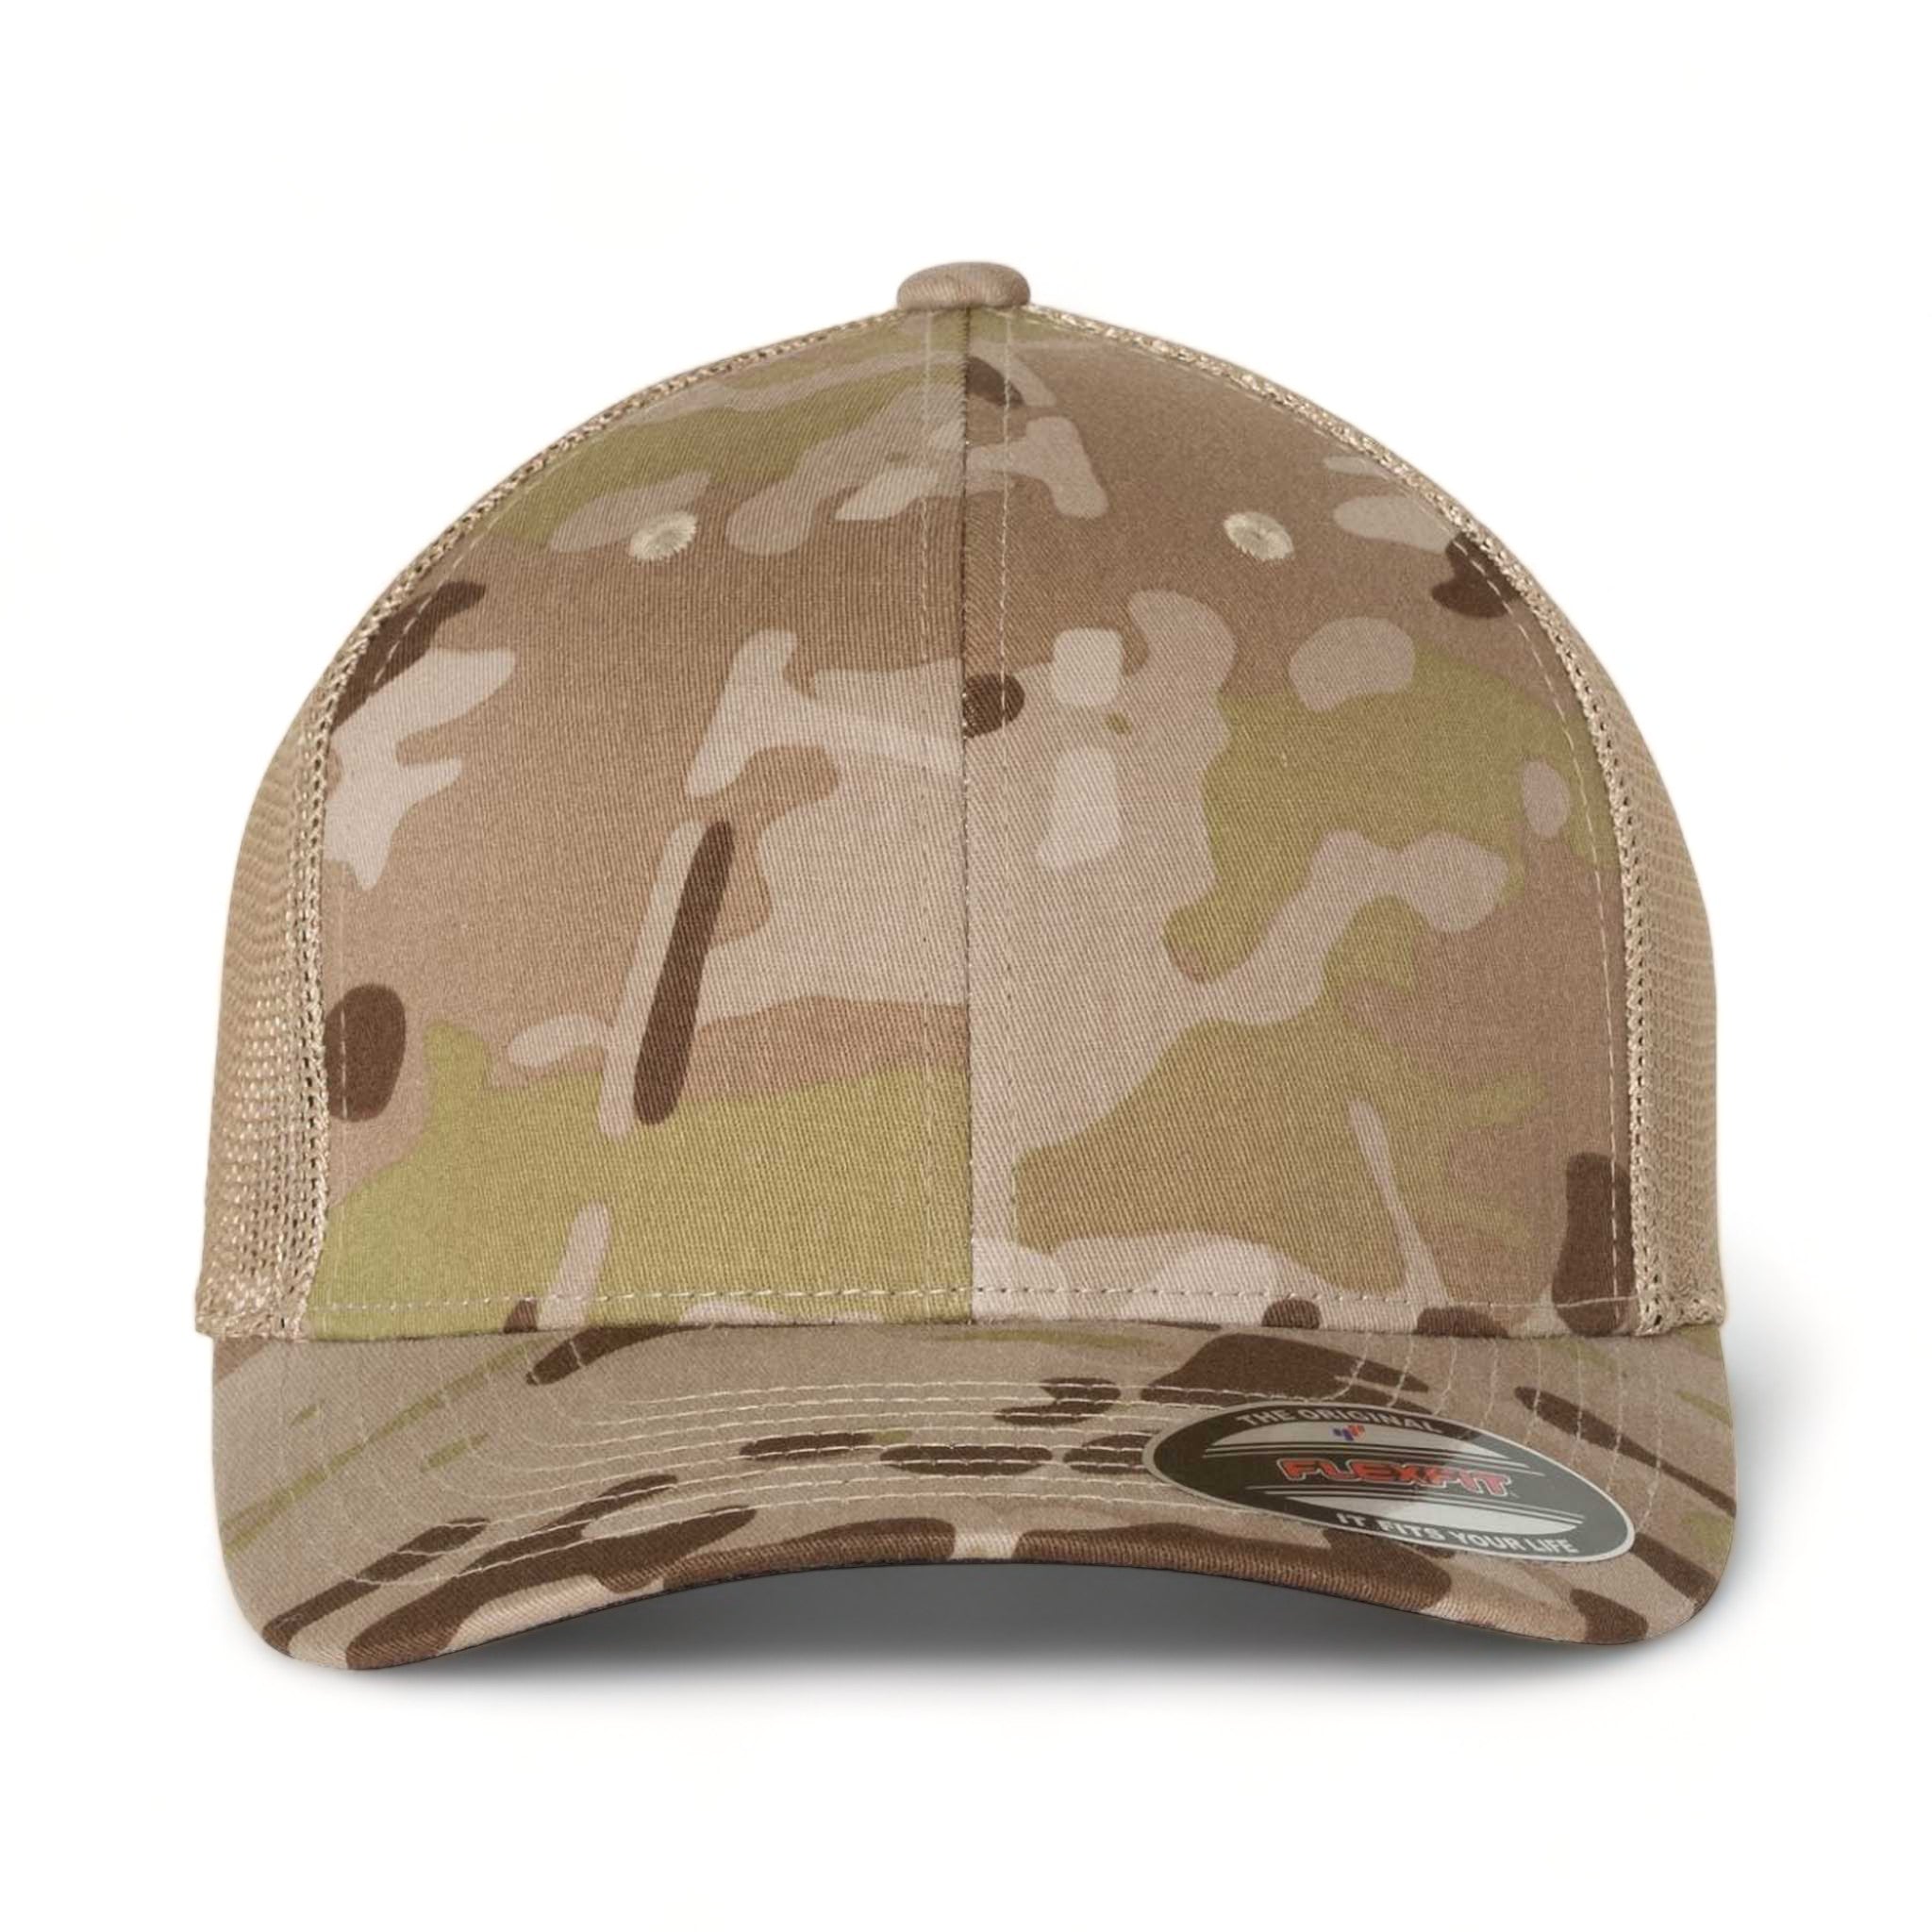 Front view of Flexfit 6511 custom hat in multicam arid and tan